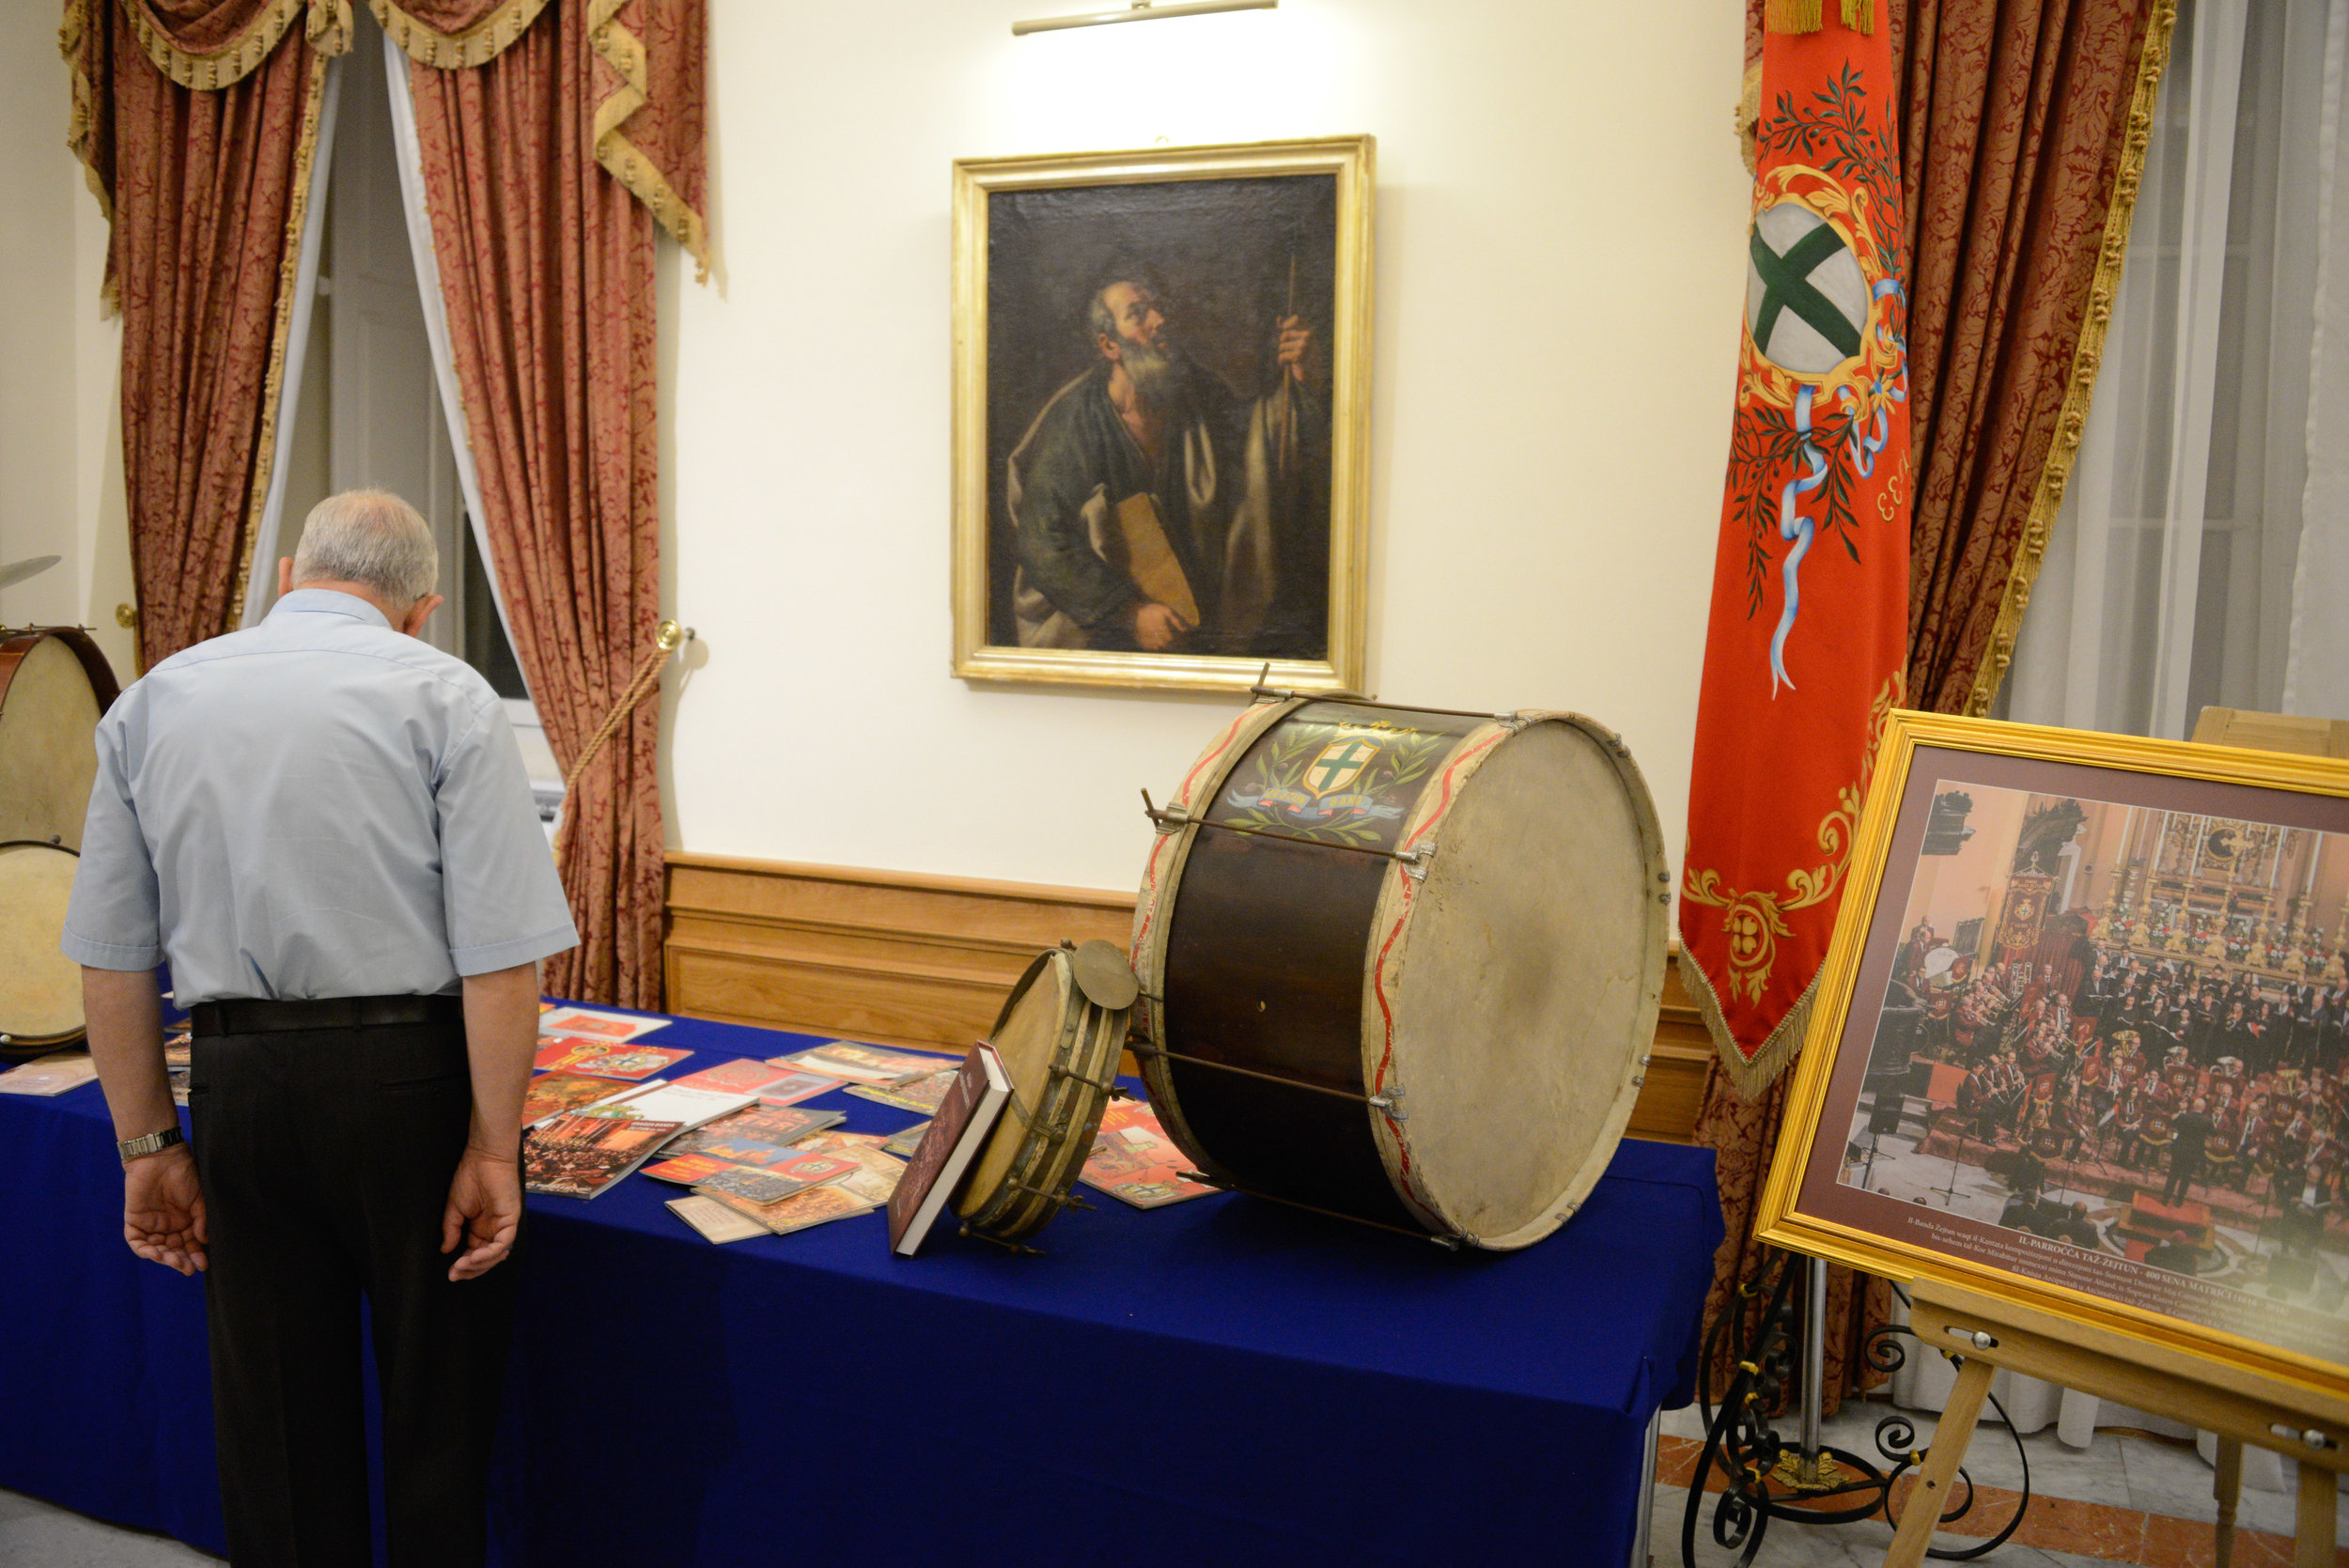  A man inspects drums and memorabilia of the Zejtun Band Club inside The Ministry of Foreign Affairs. Government buildings normally restricted to public access were open on Notte Bianca and filled with different displays. Marching band clubs are a bi